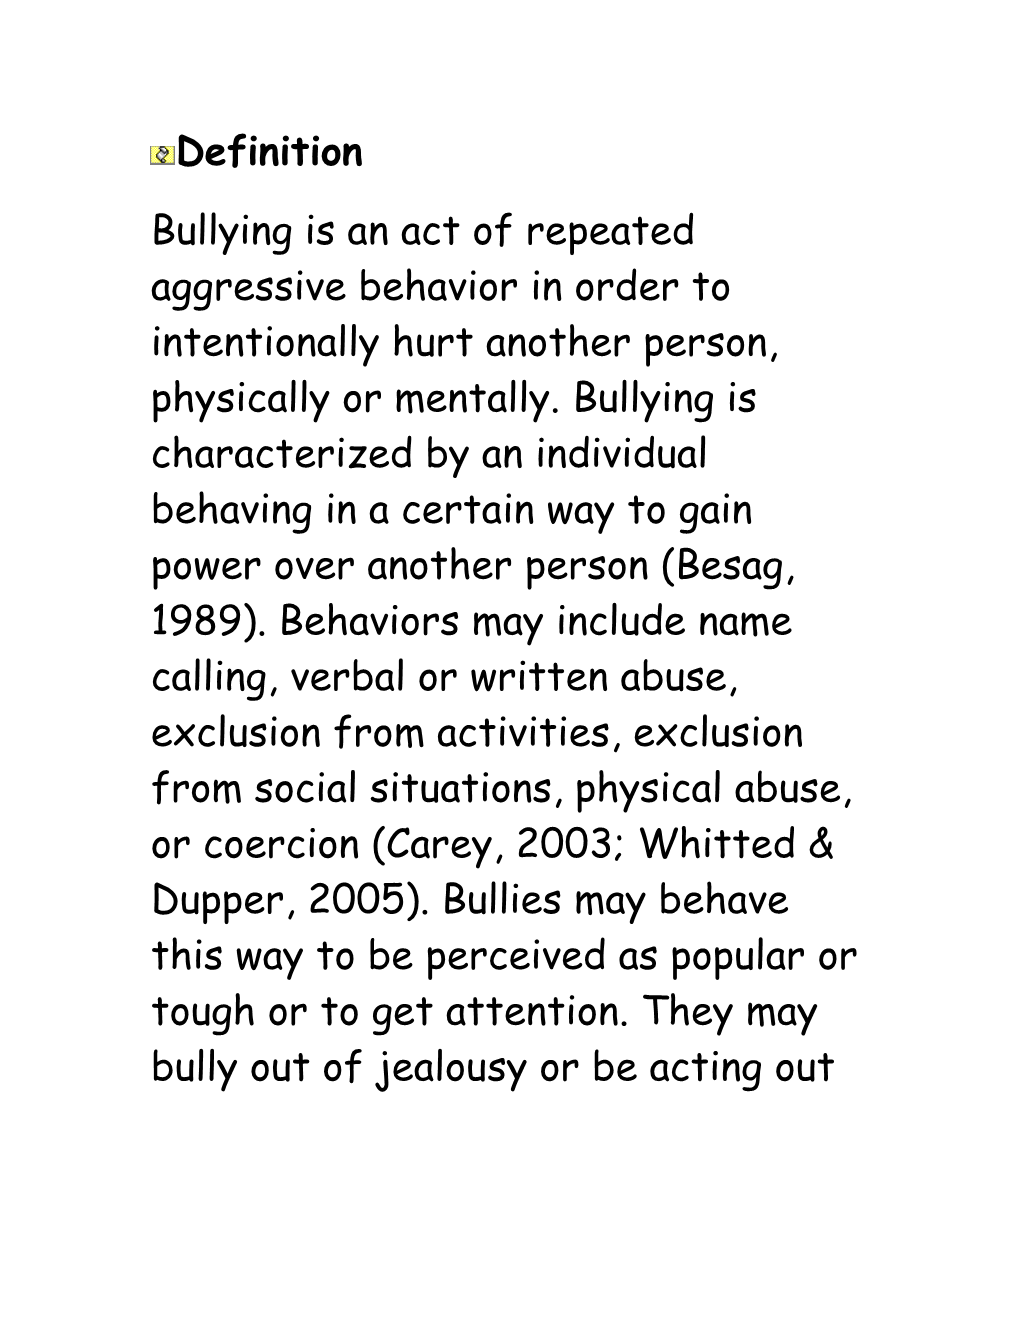 Definition Bullying Is an Act of Repeated Aggressive Behavior in Order to Intentionally Hurt Another Person, Physically Or Mentally